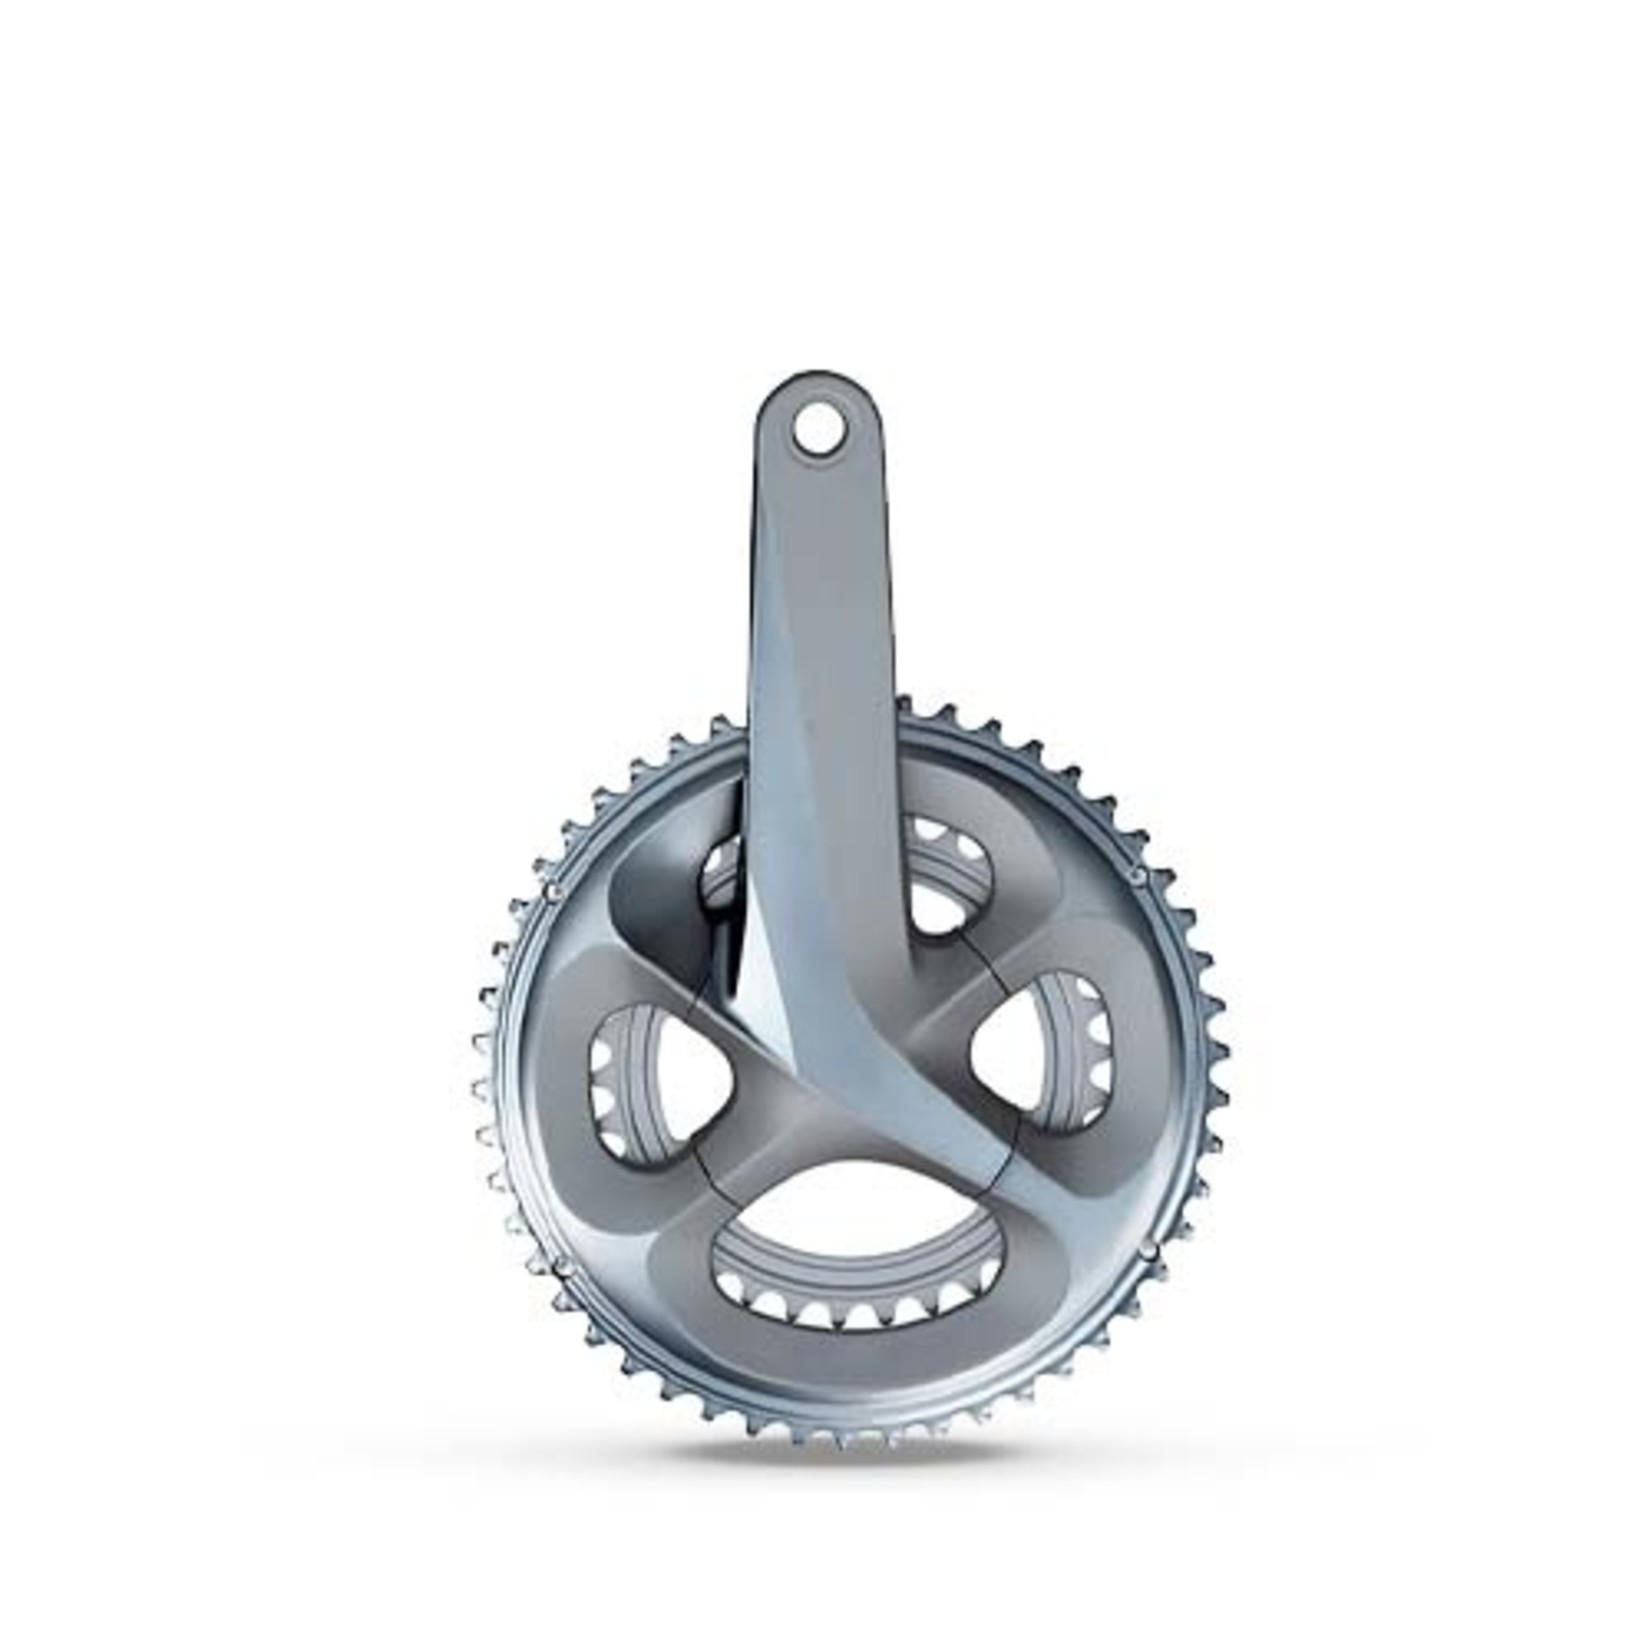 DRIVELINE COMPACT CHAINSET 50/34